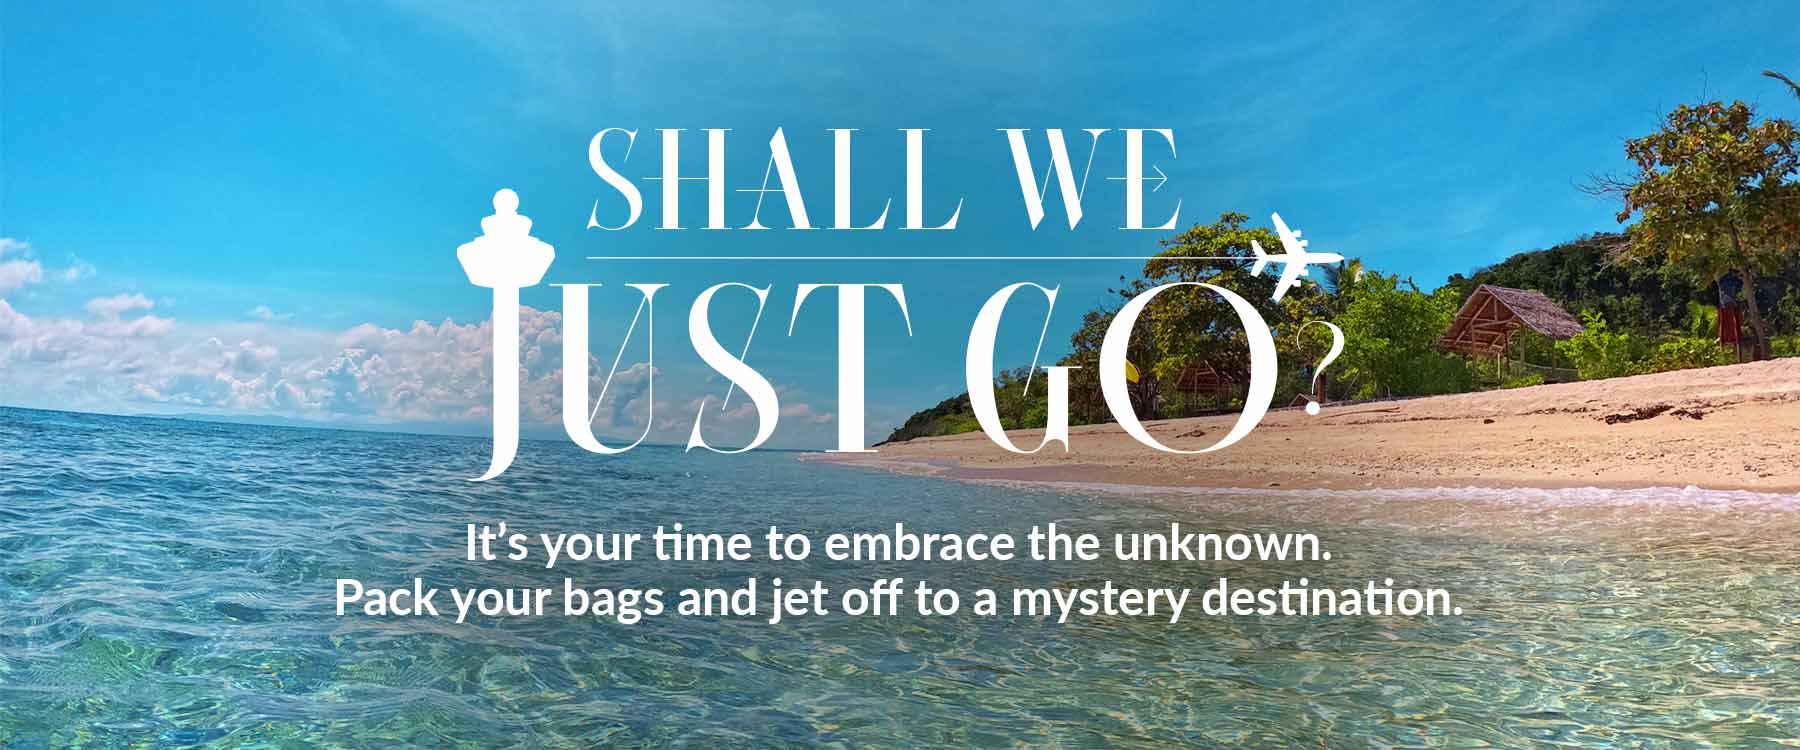 https://www.changiairport.com/content/dam/cag/discover/shall-we-just-go/Shall_We_Just_Go_Banner_T_1800x750.jpg